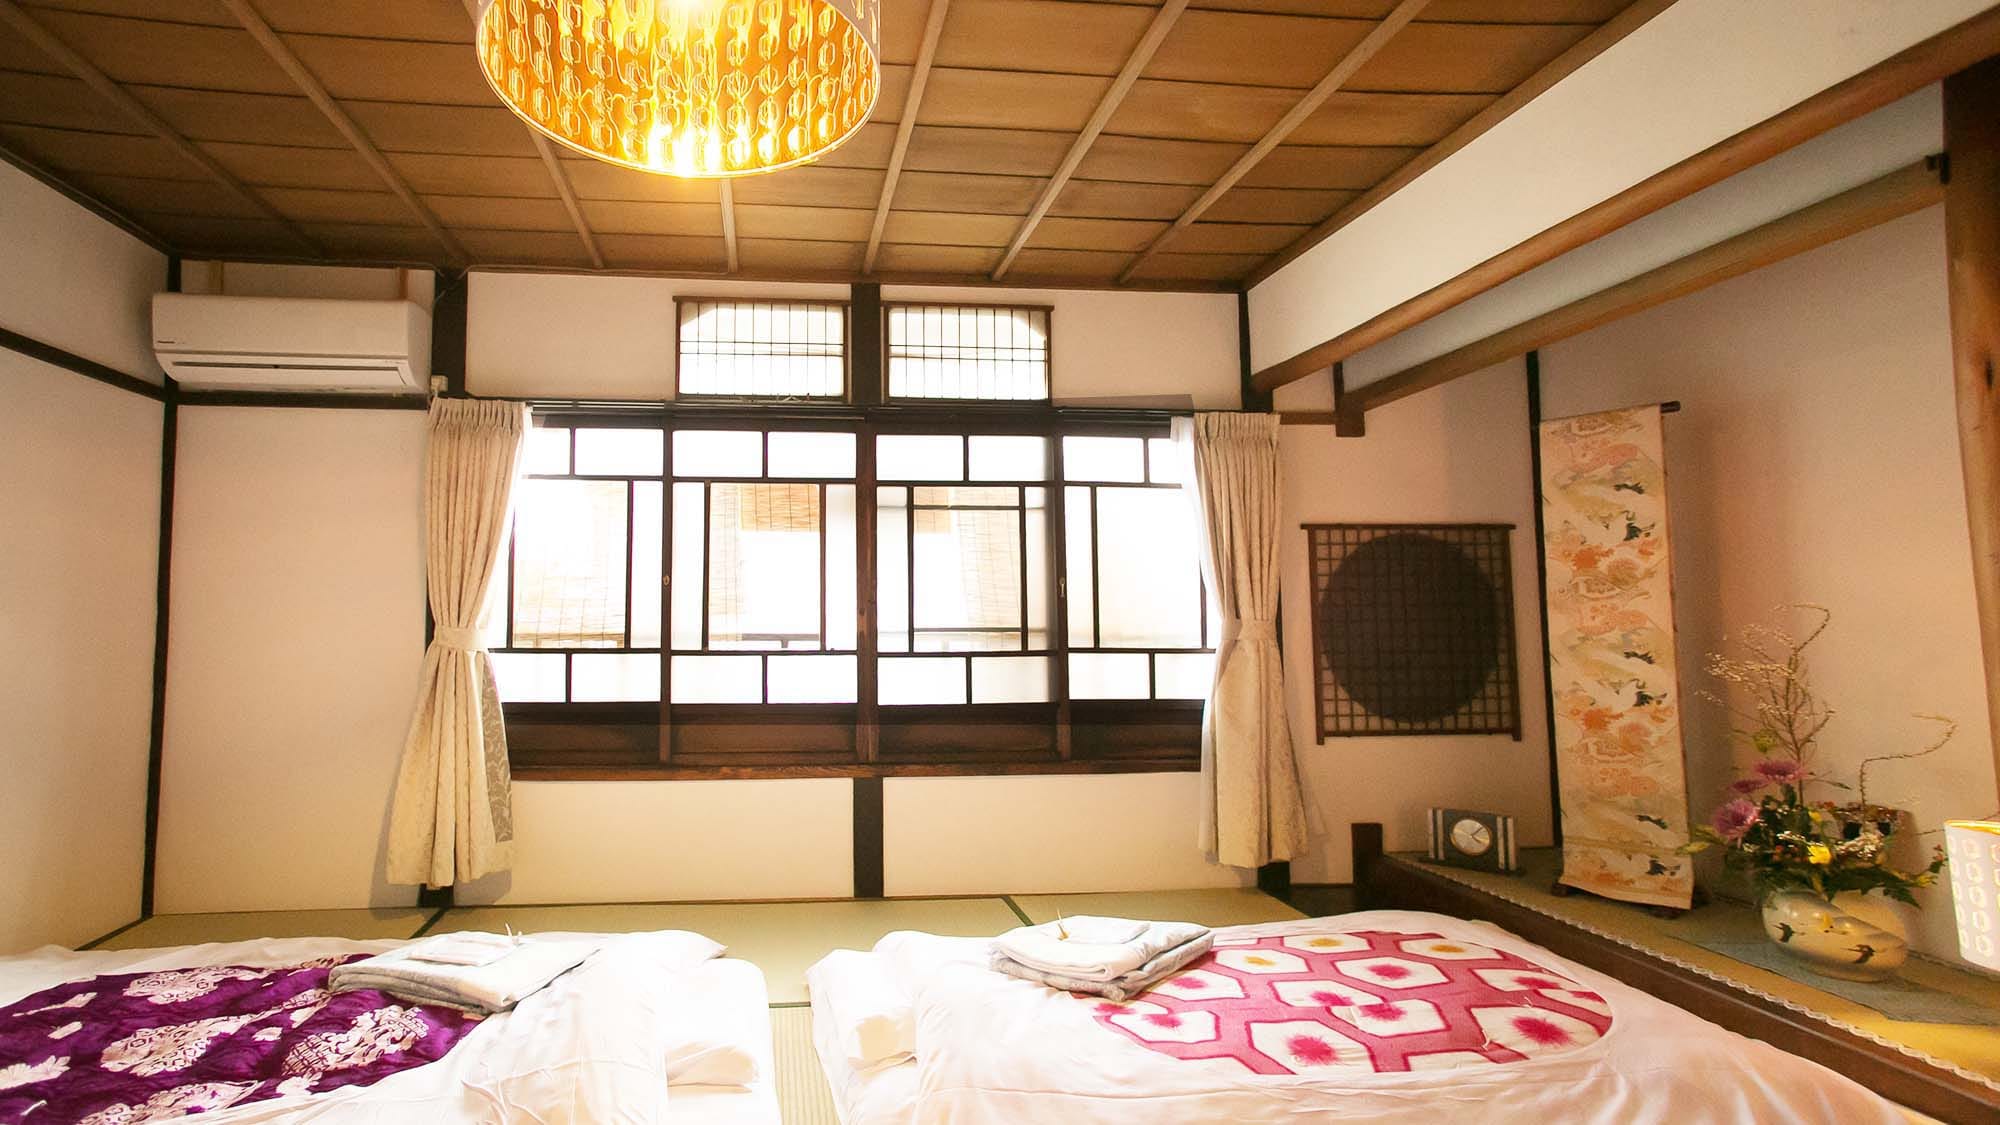 ・ [Sakura] A calm room surrounded by a Japanese interior